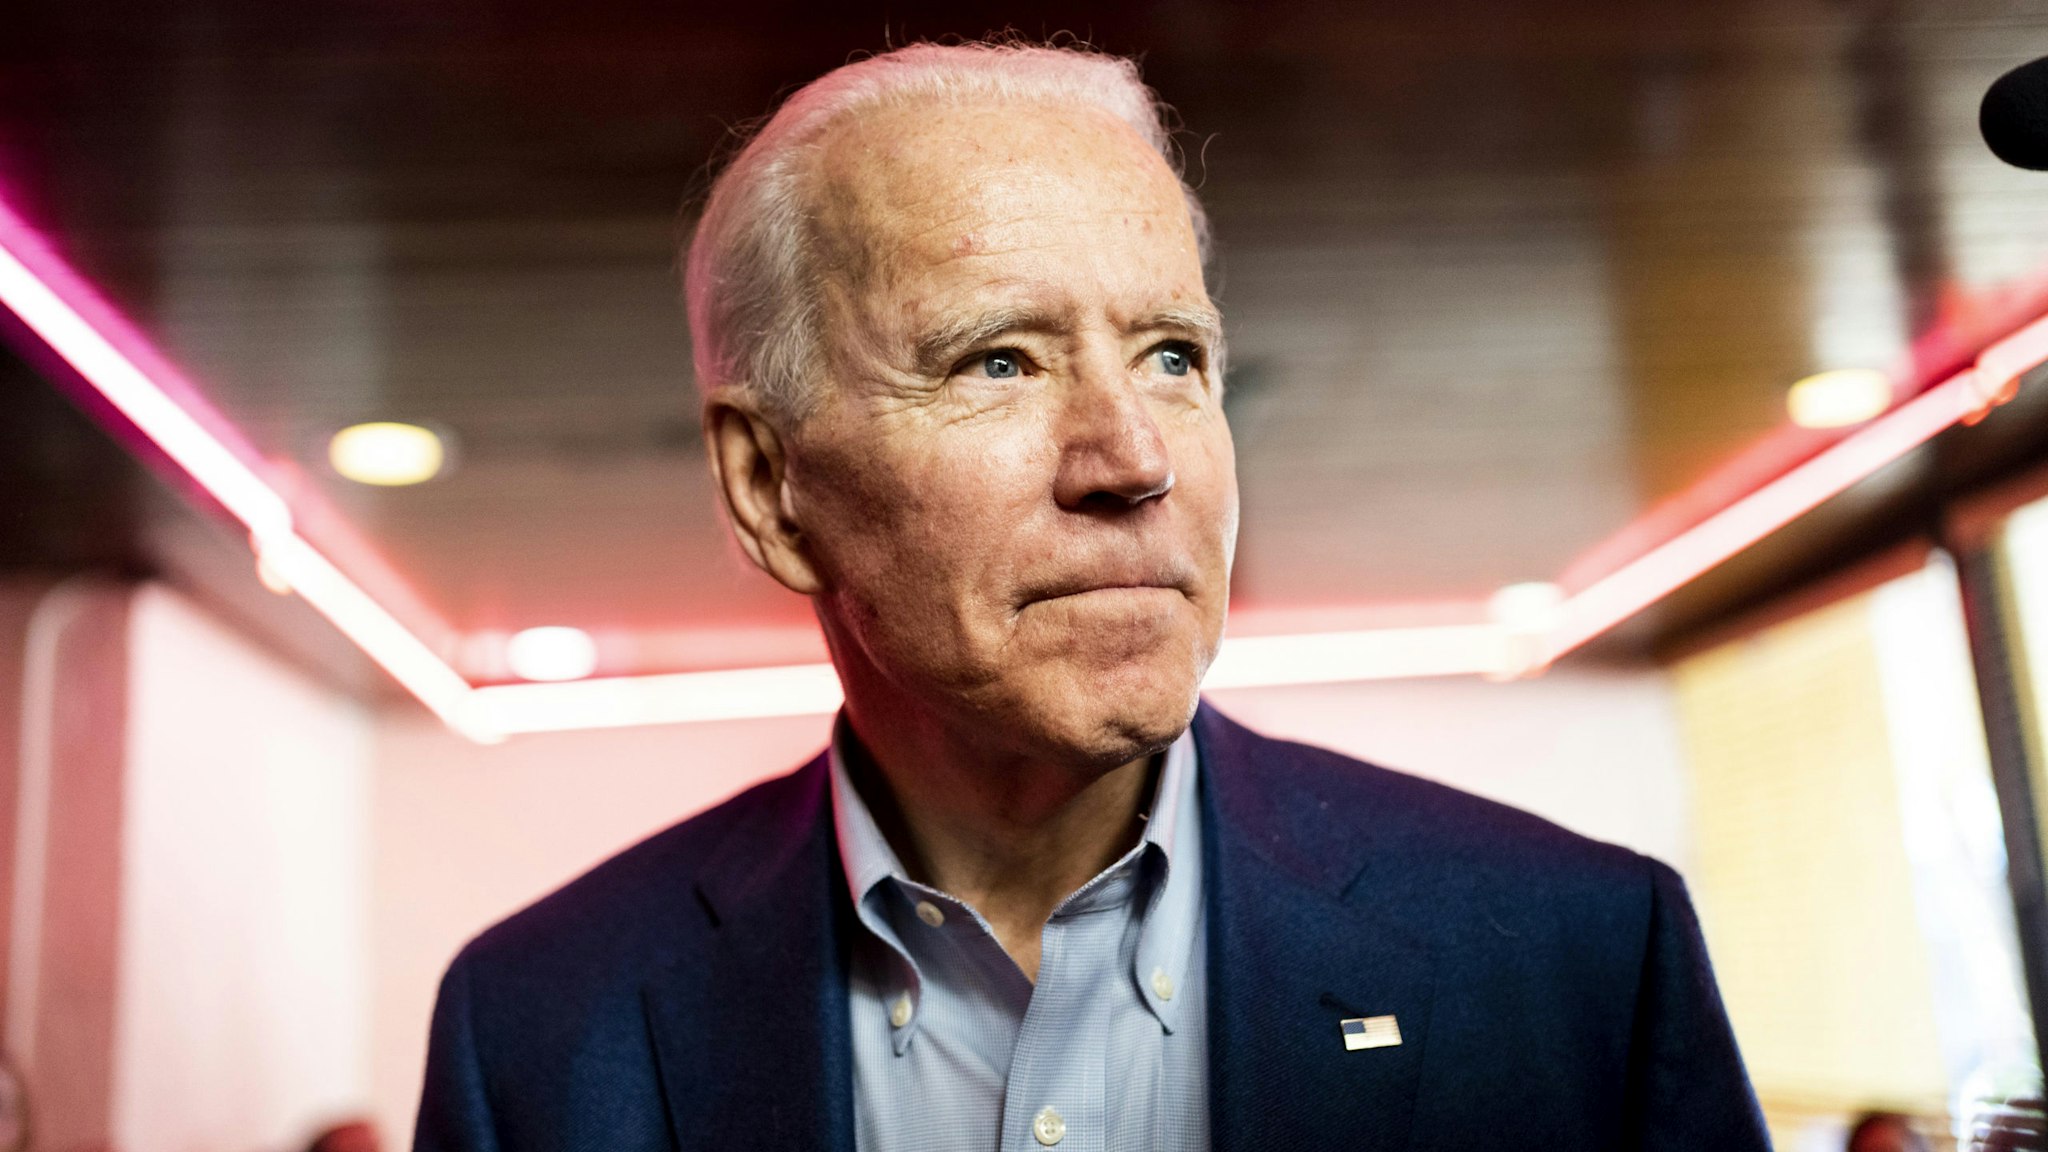 LOS ANGELES, CALIFORNIA - MARCH 3, 2020: Democratic Presidential candidate former Vice President Joe Biden meets California voters at the famous Roscoe's House of Chicken and Waffles in Los Angeles, California on Tuesday March 3, 2020.